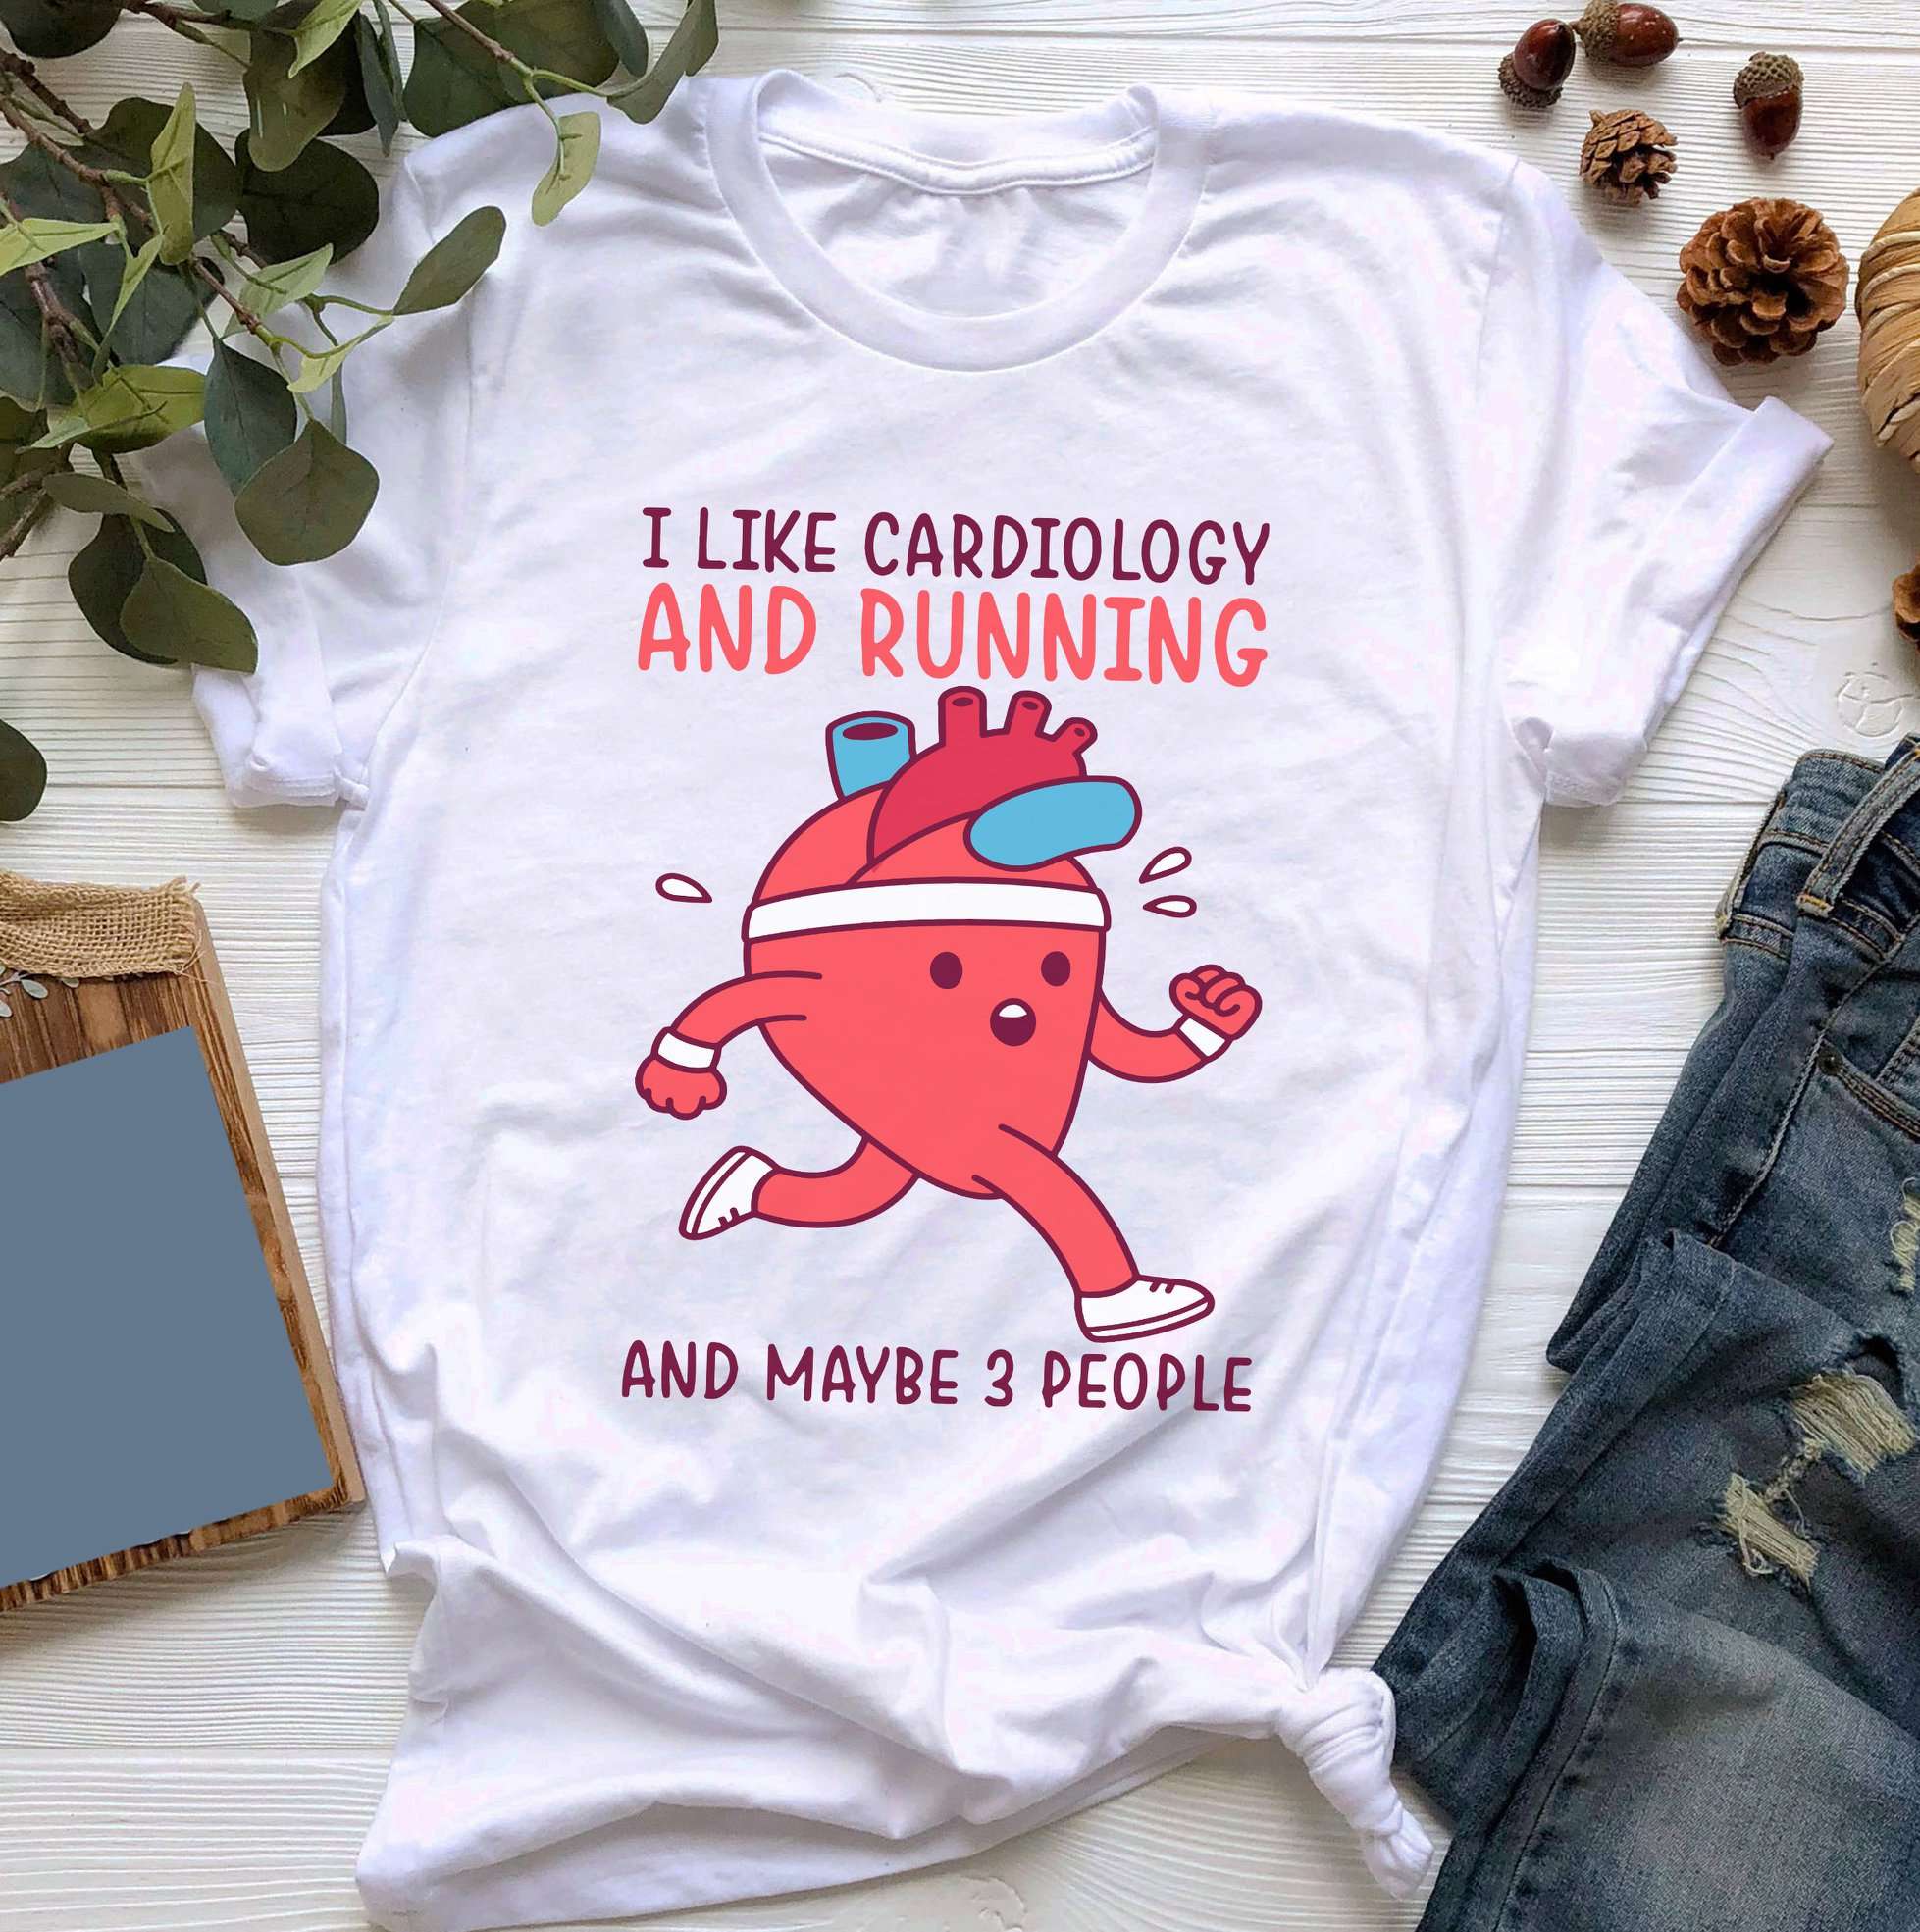 I like cardiology and running and maybe 3 people - Running heart, cardio training